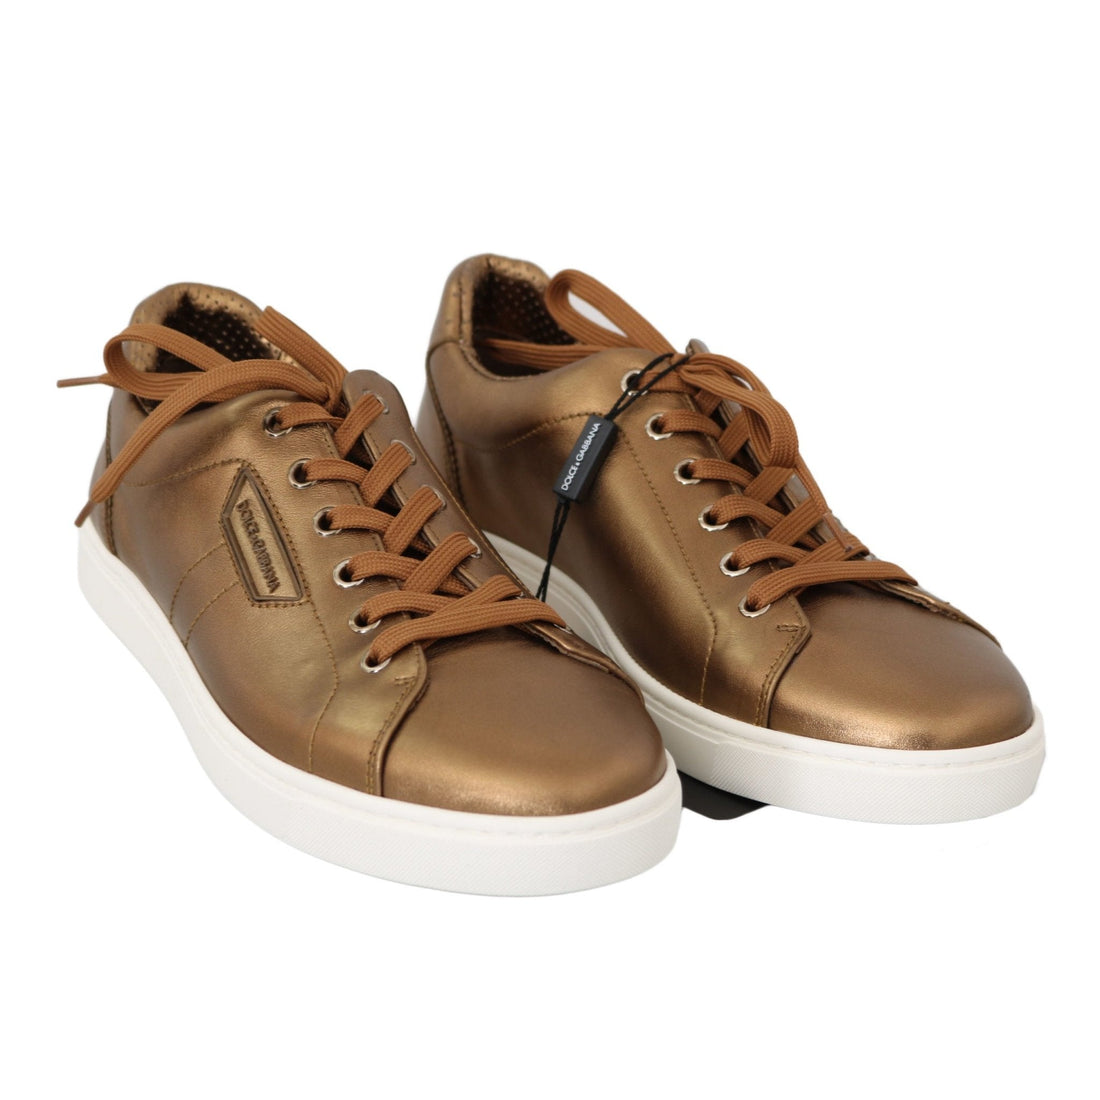 Dolce & Gabbana Gold Leather Mens Casual Sneakers - Paris Deluxe